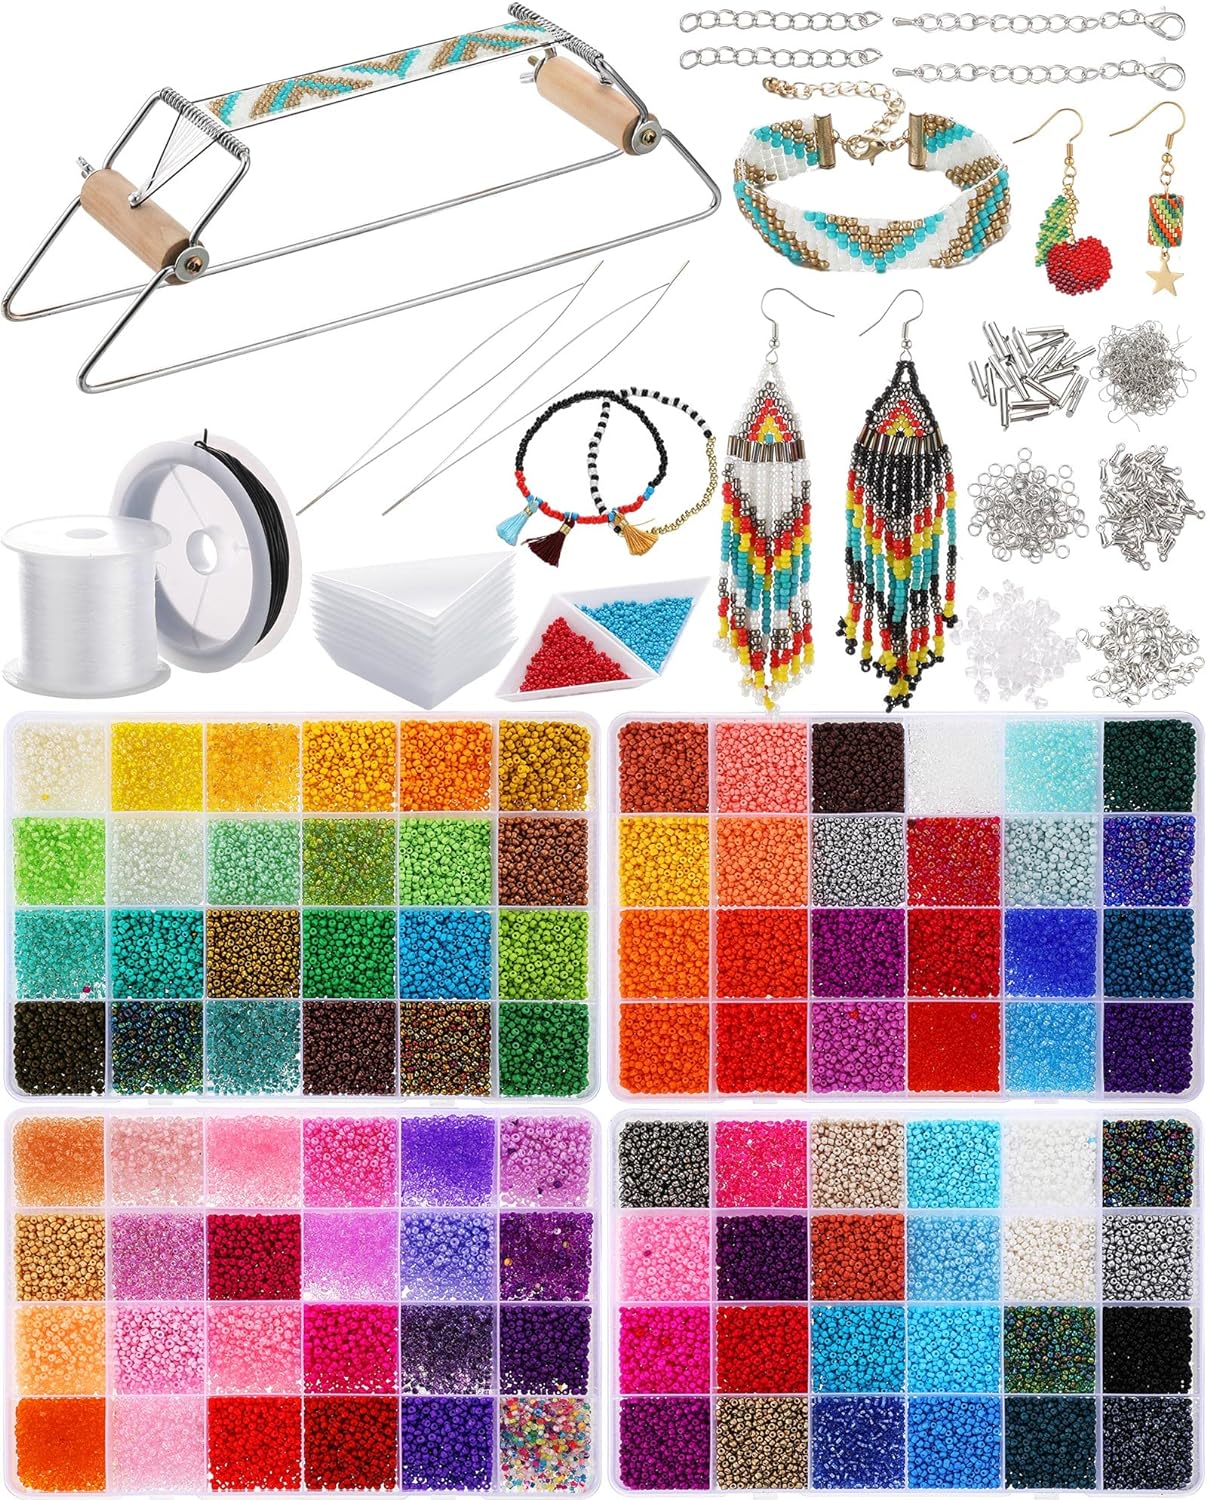 Bead Loom Kit for Adults Beading Loom Supplies 48000 Pcs Glass Seed Beads Bracelets Jewelry Earring Making Tools Birthday Graduation Gifts for Girls DIY Craft